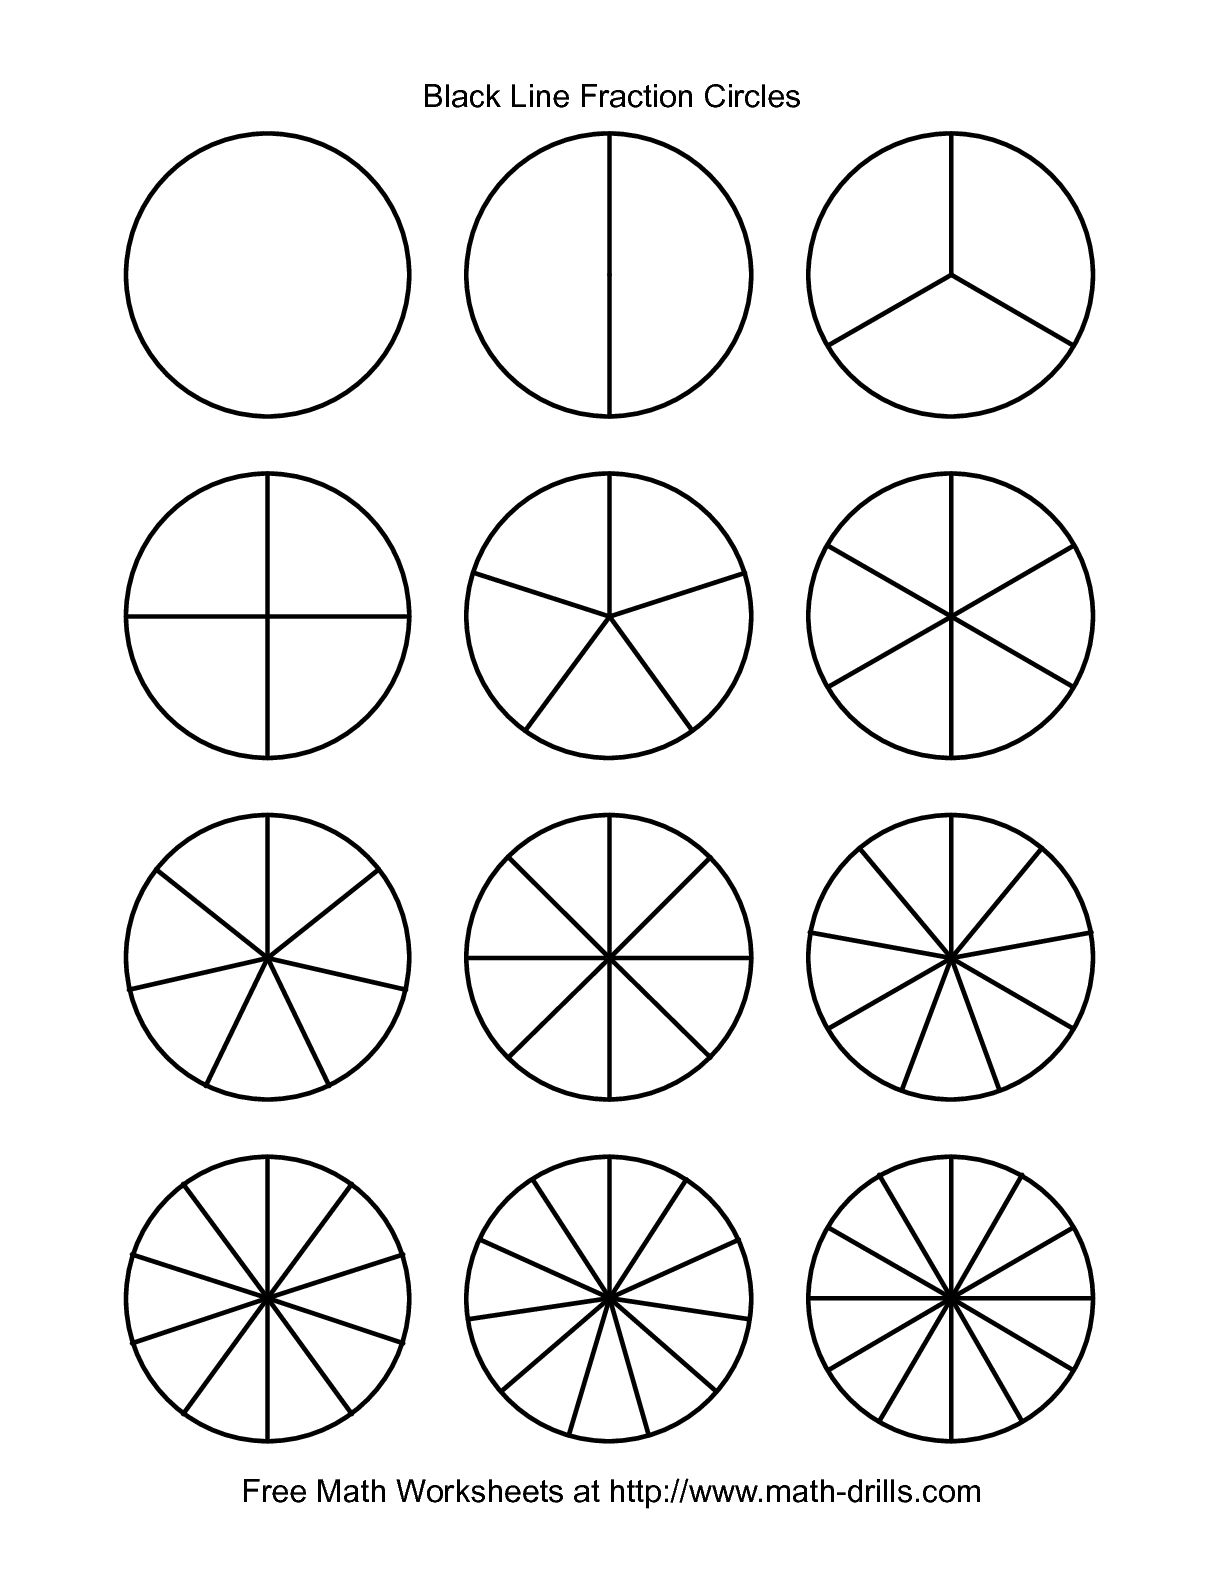 The Blackline Fraction Circles    Small Unlabeled Fractions Worksheet